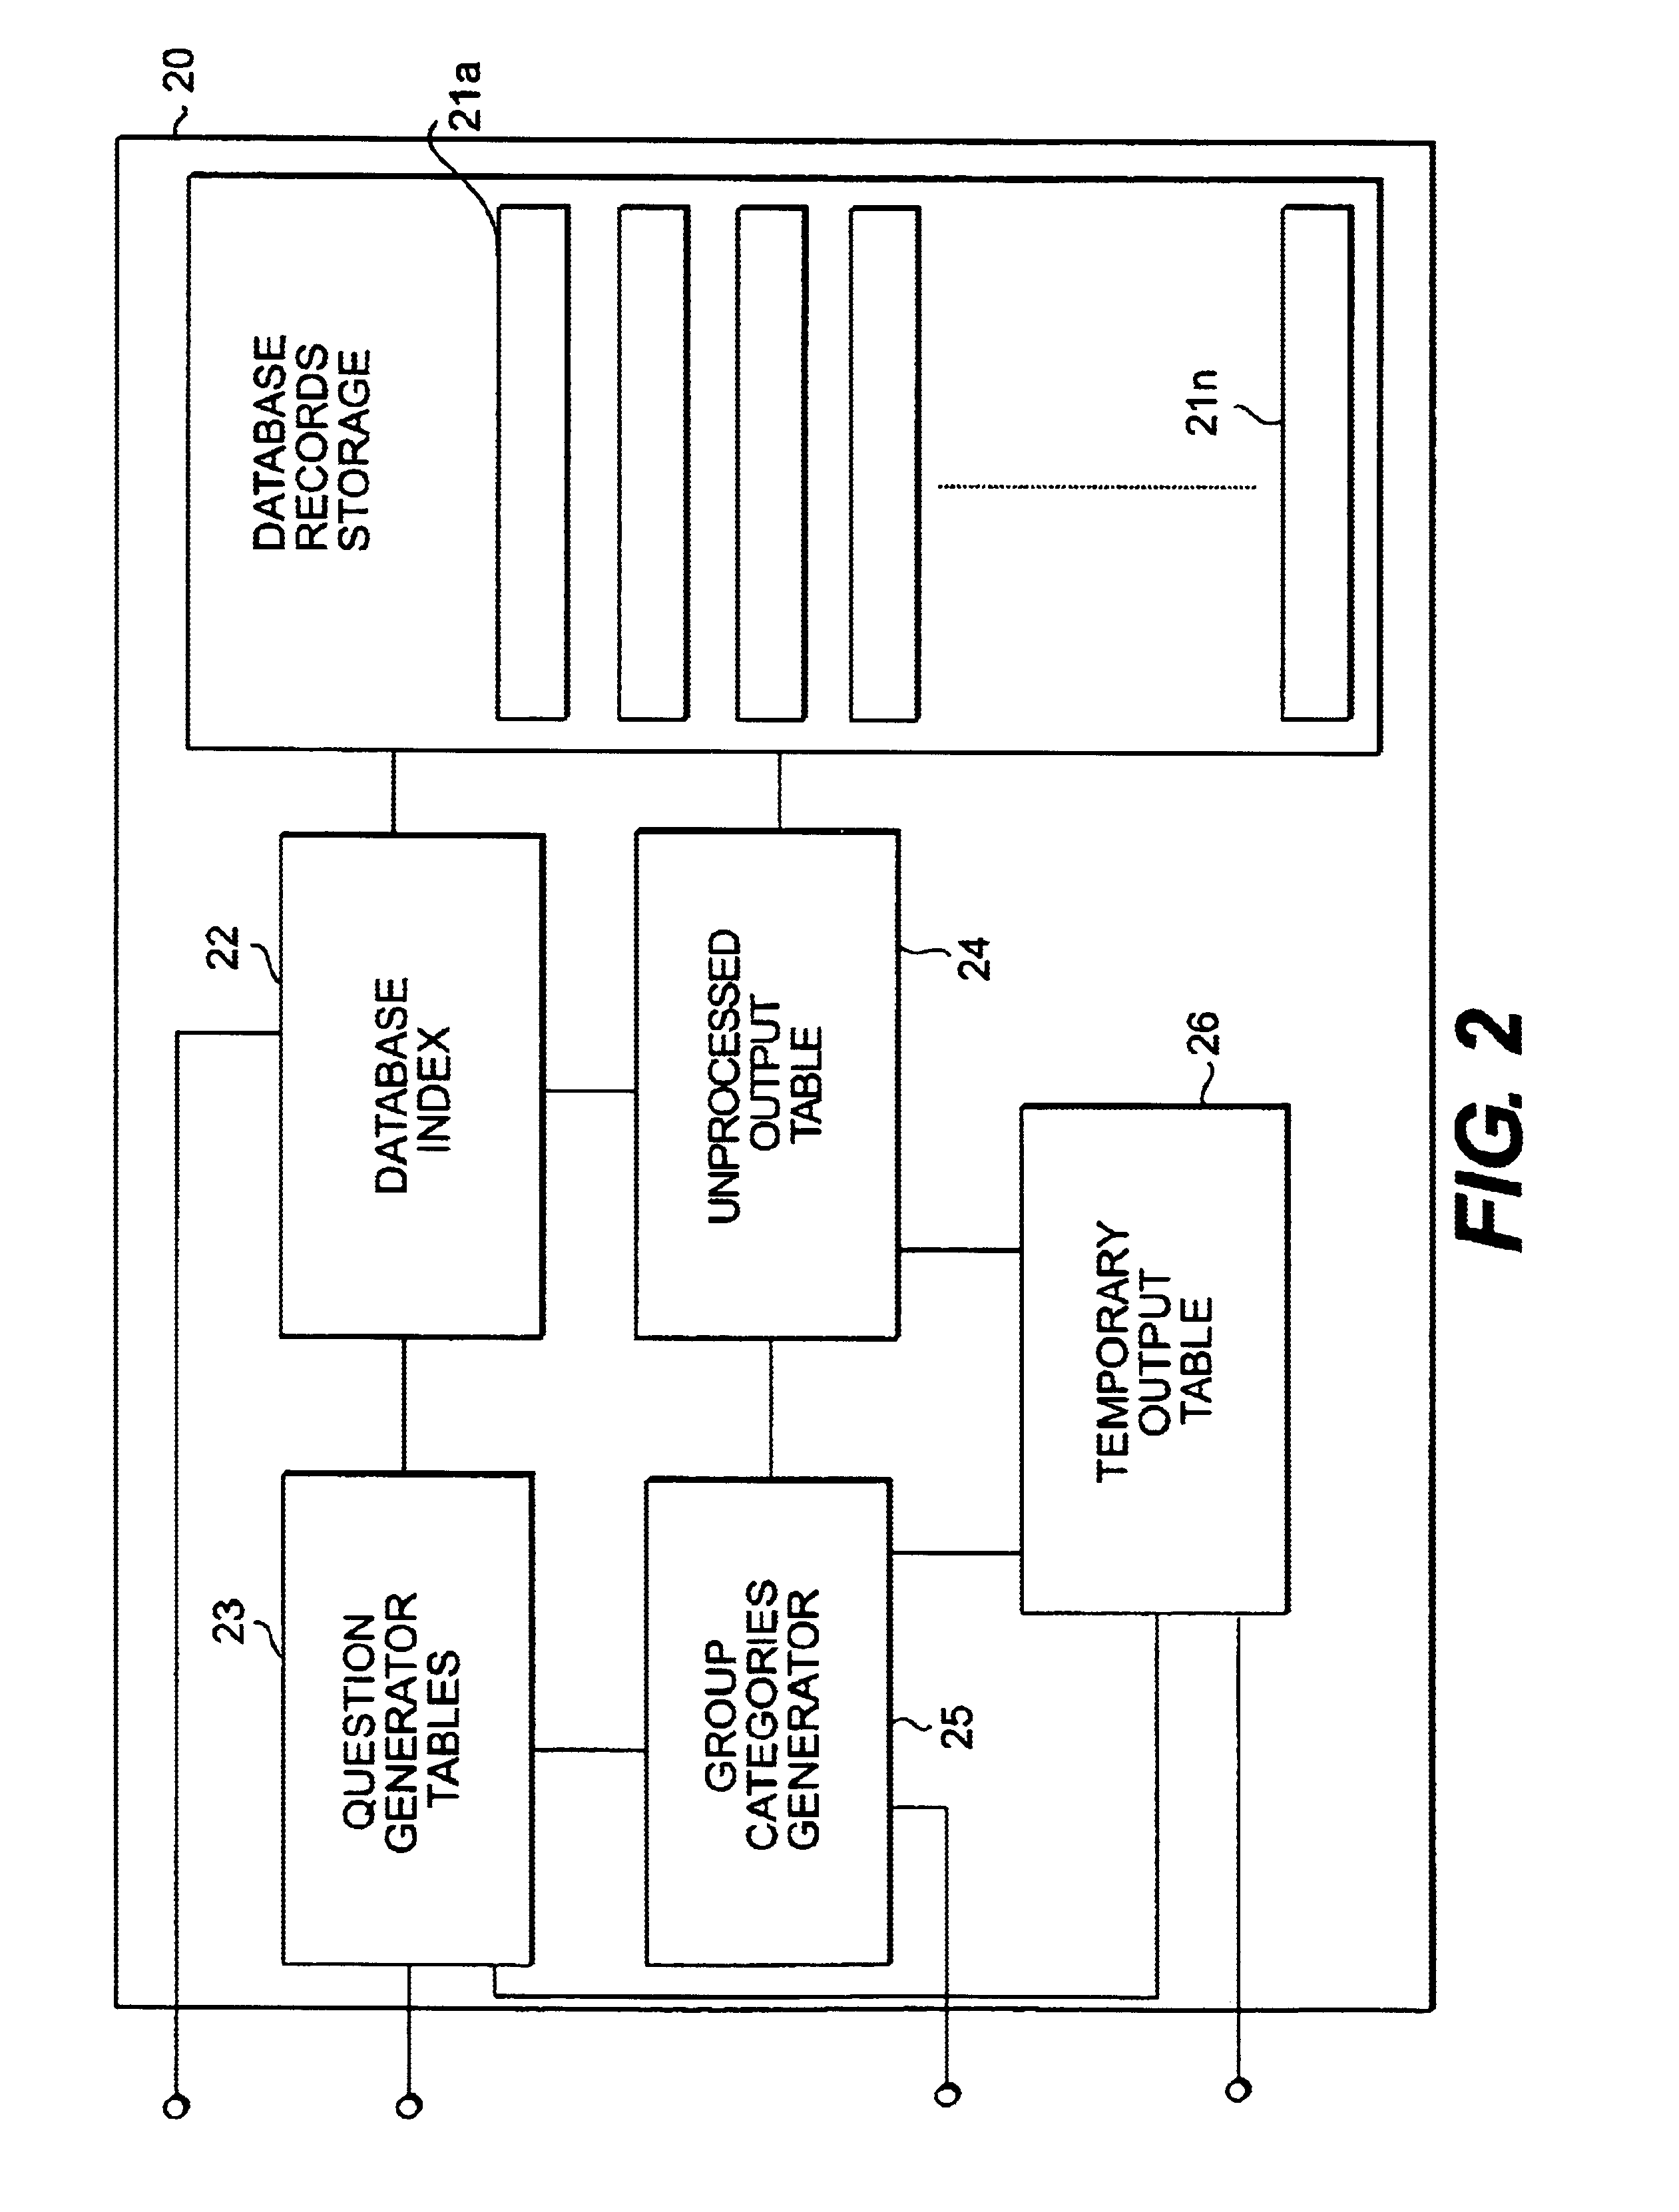 Method and system for selectively presenting database results in an information retrieval system